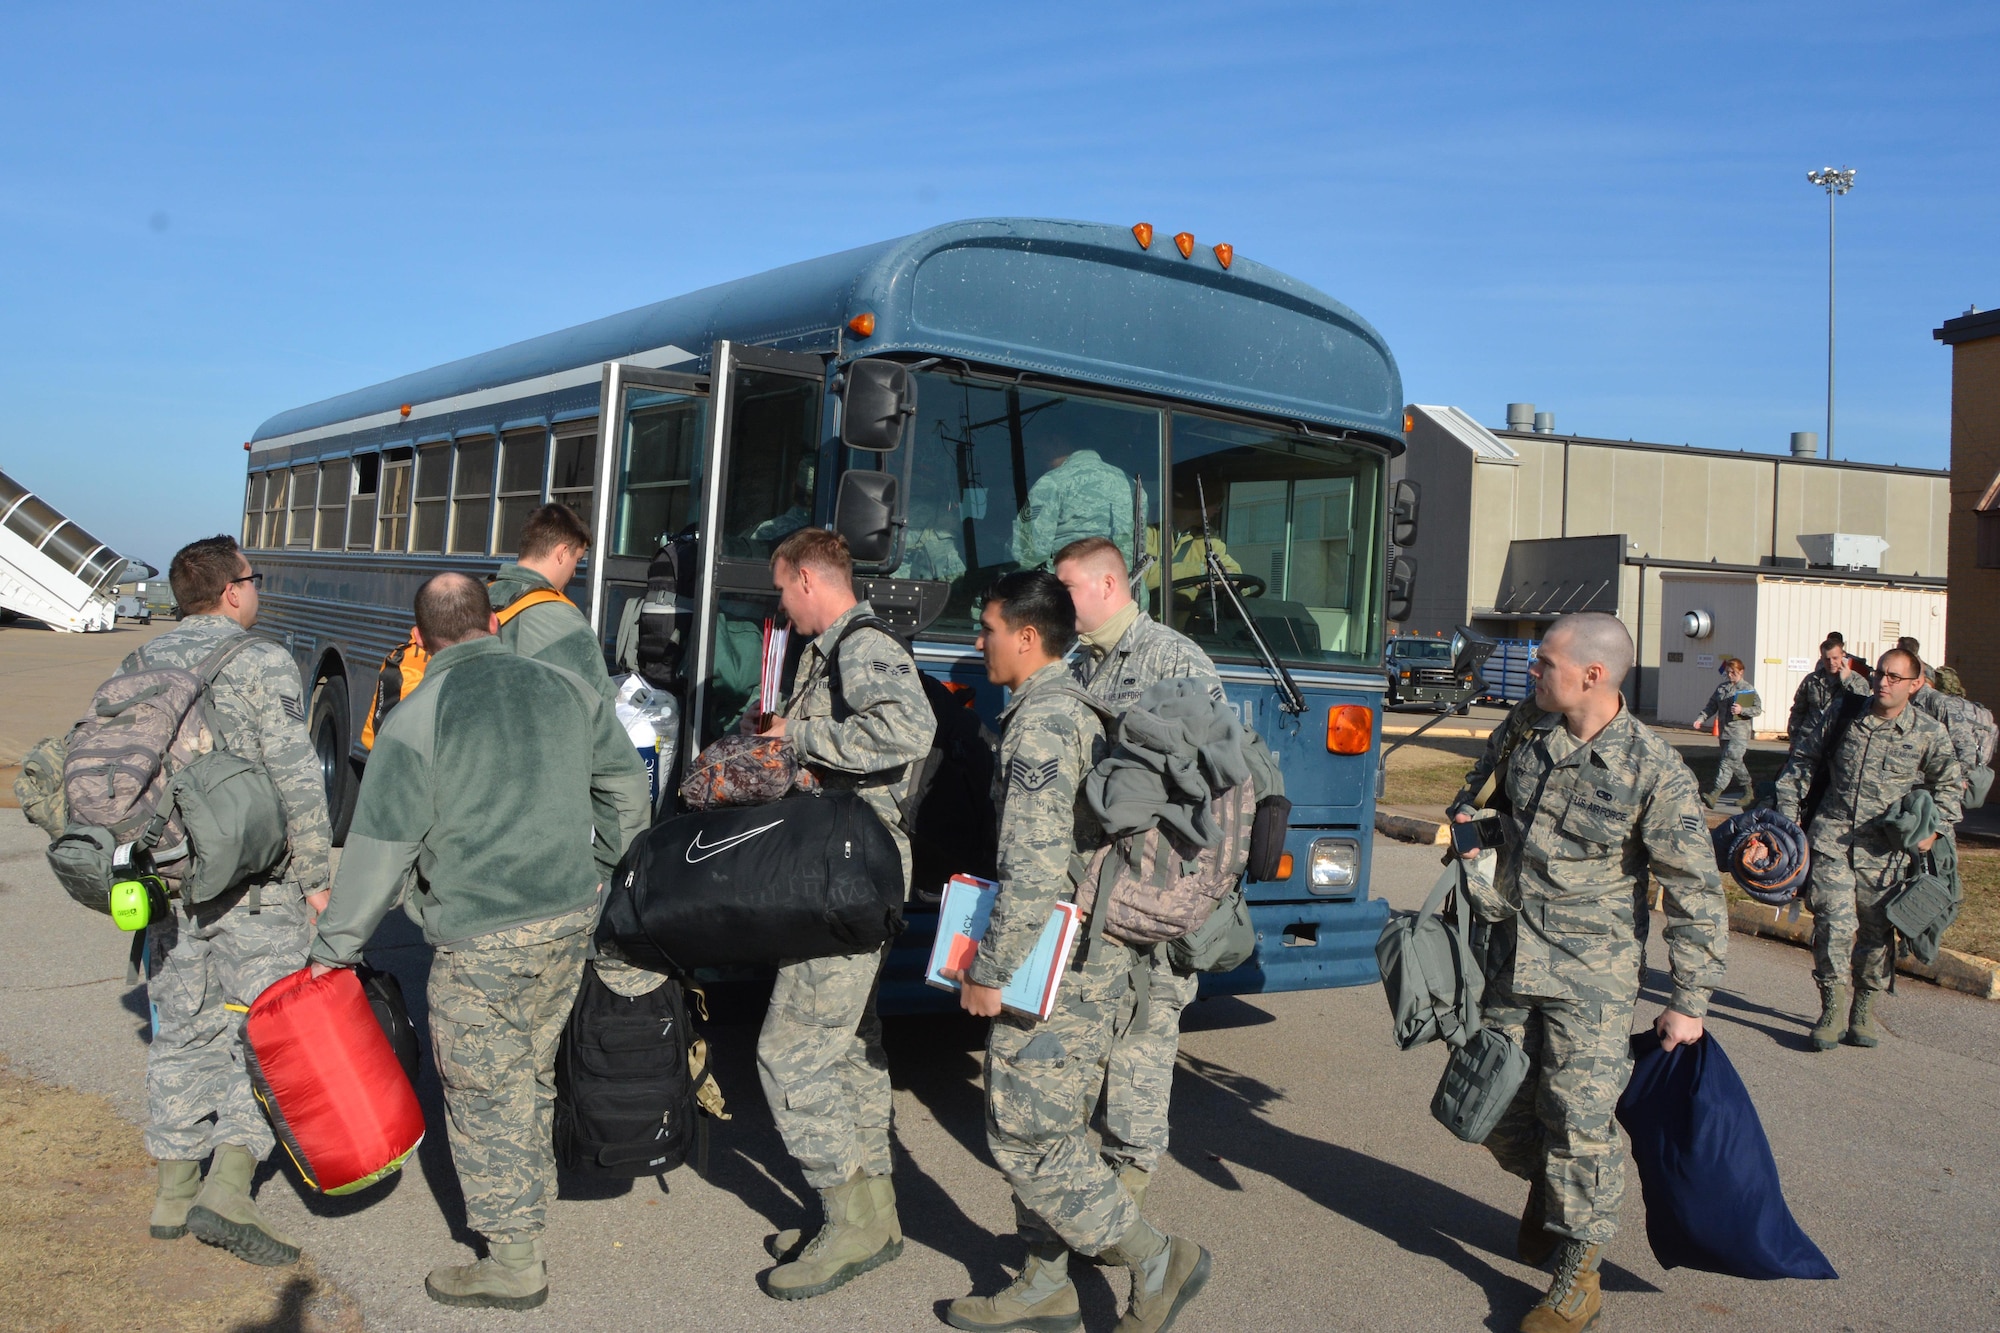 Deploying Citizen Airmen file into the bus to process for a deployment to Incirlik Air Base, Turkey.  Ninety-four 507th Air Refueling Wing Airmen departed to Southwest Asia Dec 12-13, 2016 to support deployed air refueling operations. (U.S. Air Force Photo/Maj. Jon Quinlan)